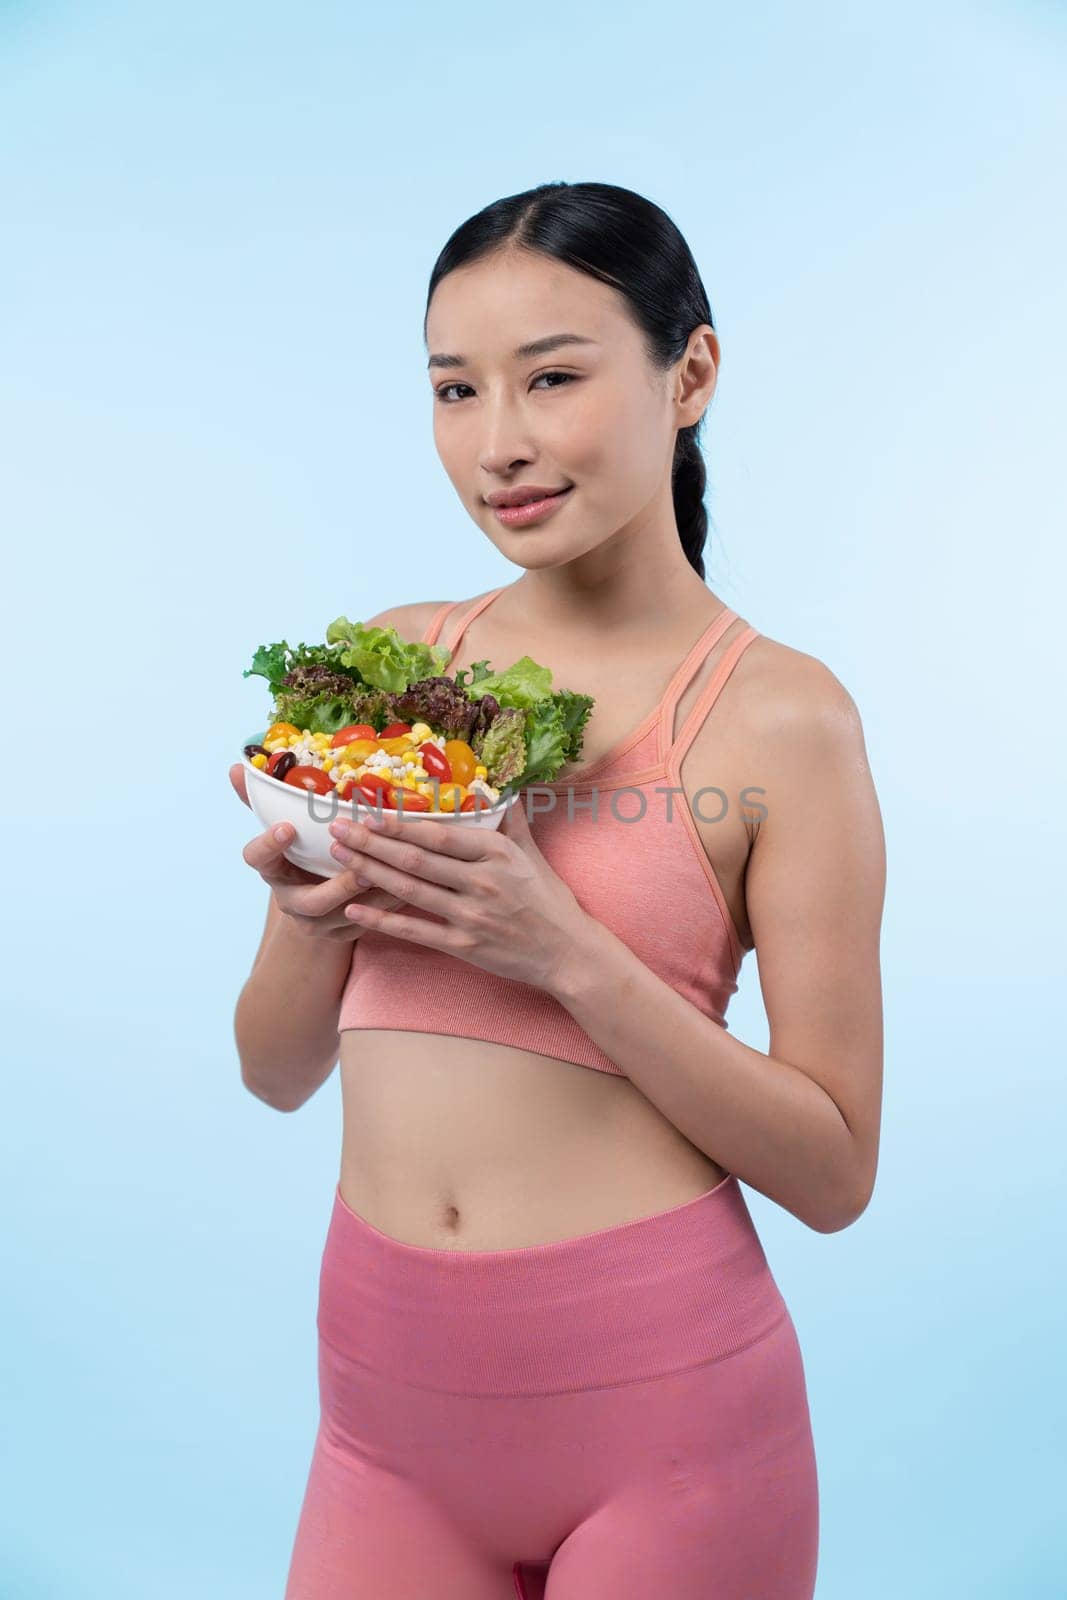 Asian woman in sportswear holding salad bowl on isolated background. Vigorous by biancoblue